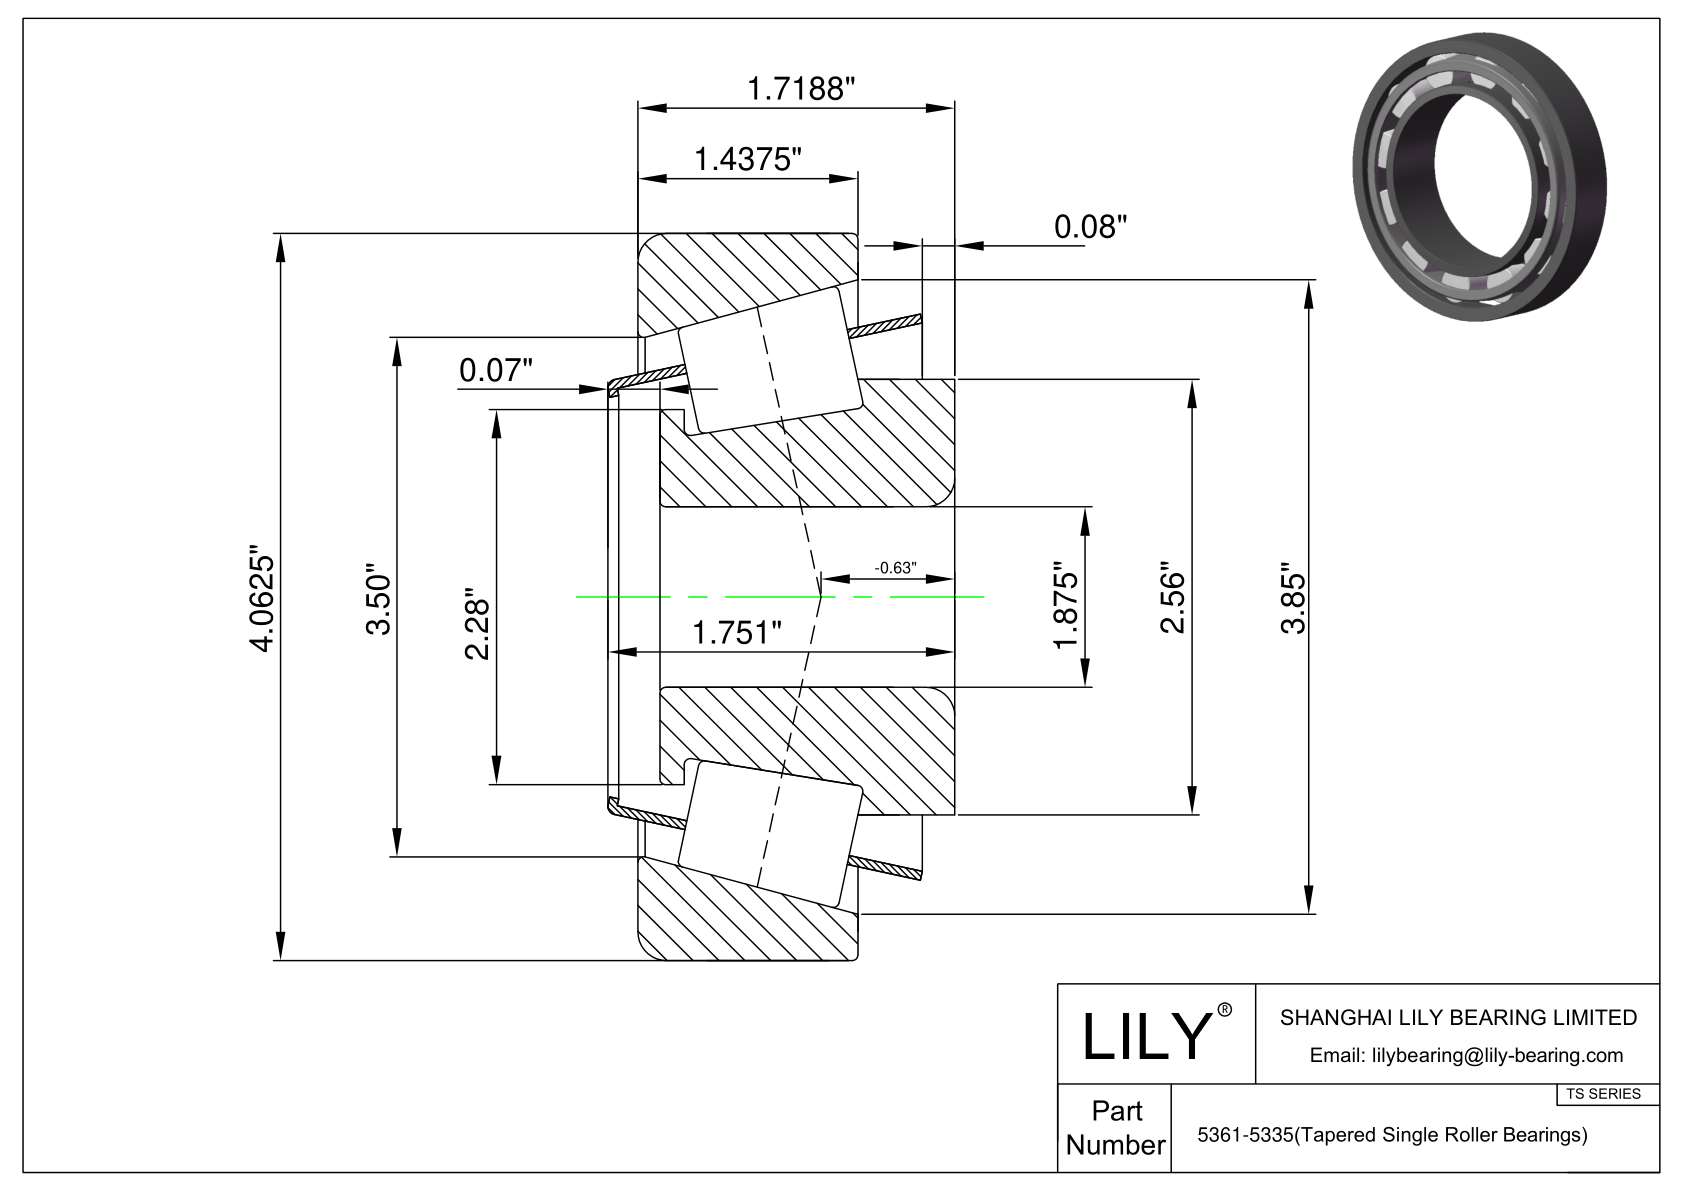 5361-5335 TS (Tapered Single Roller Bearings) (Imperial) cad drawing